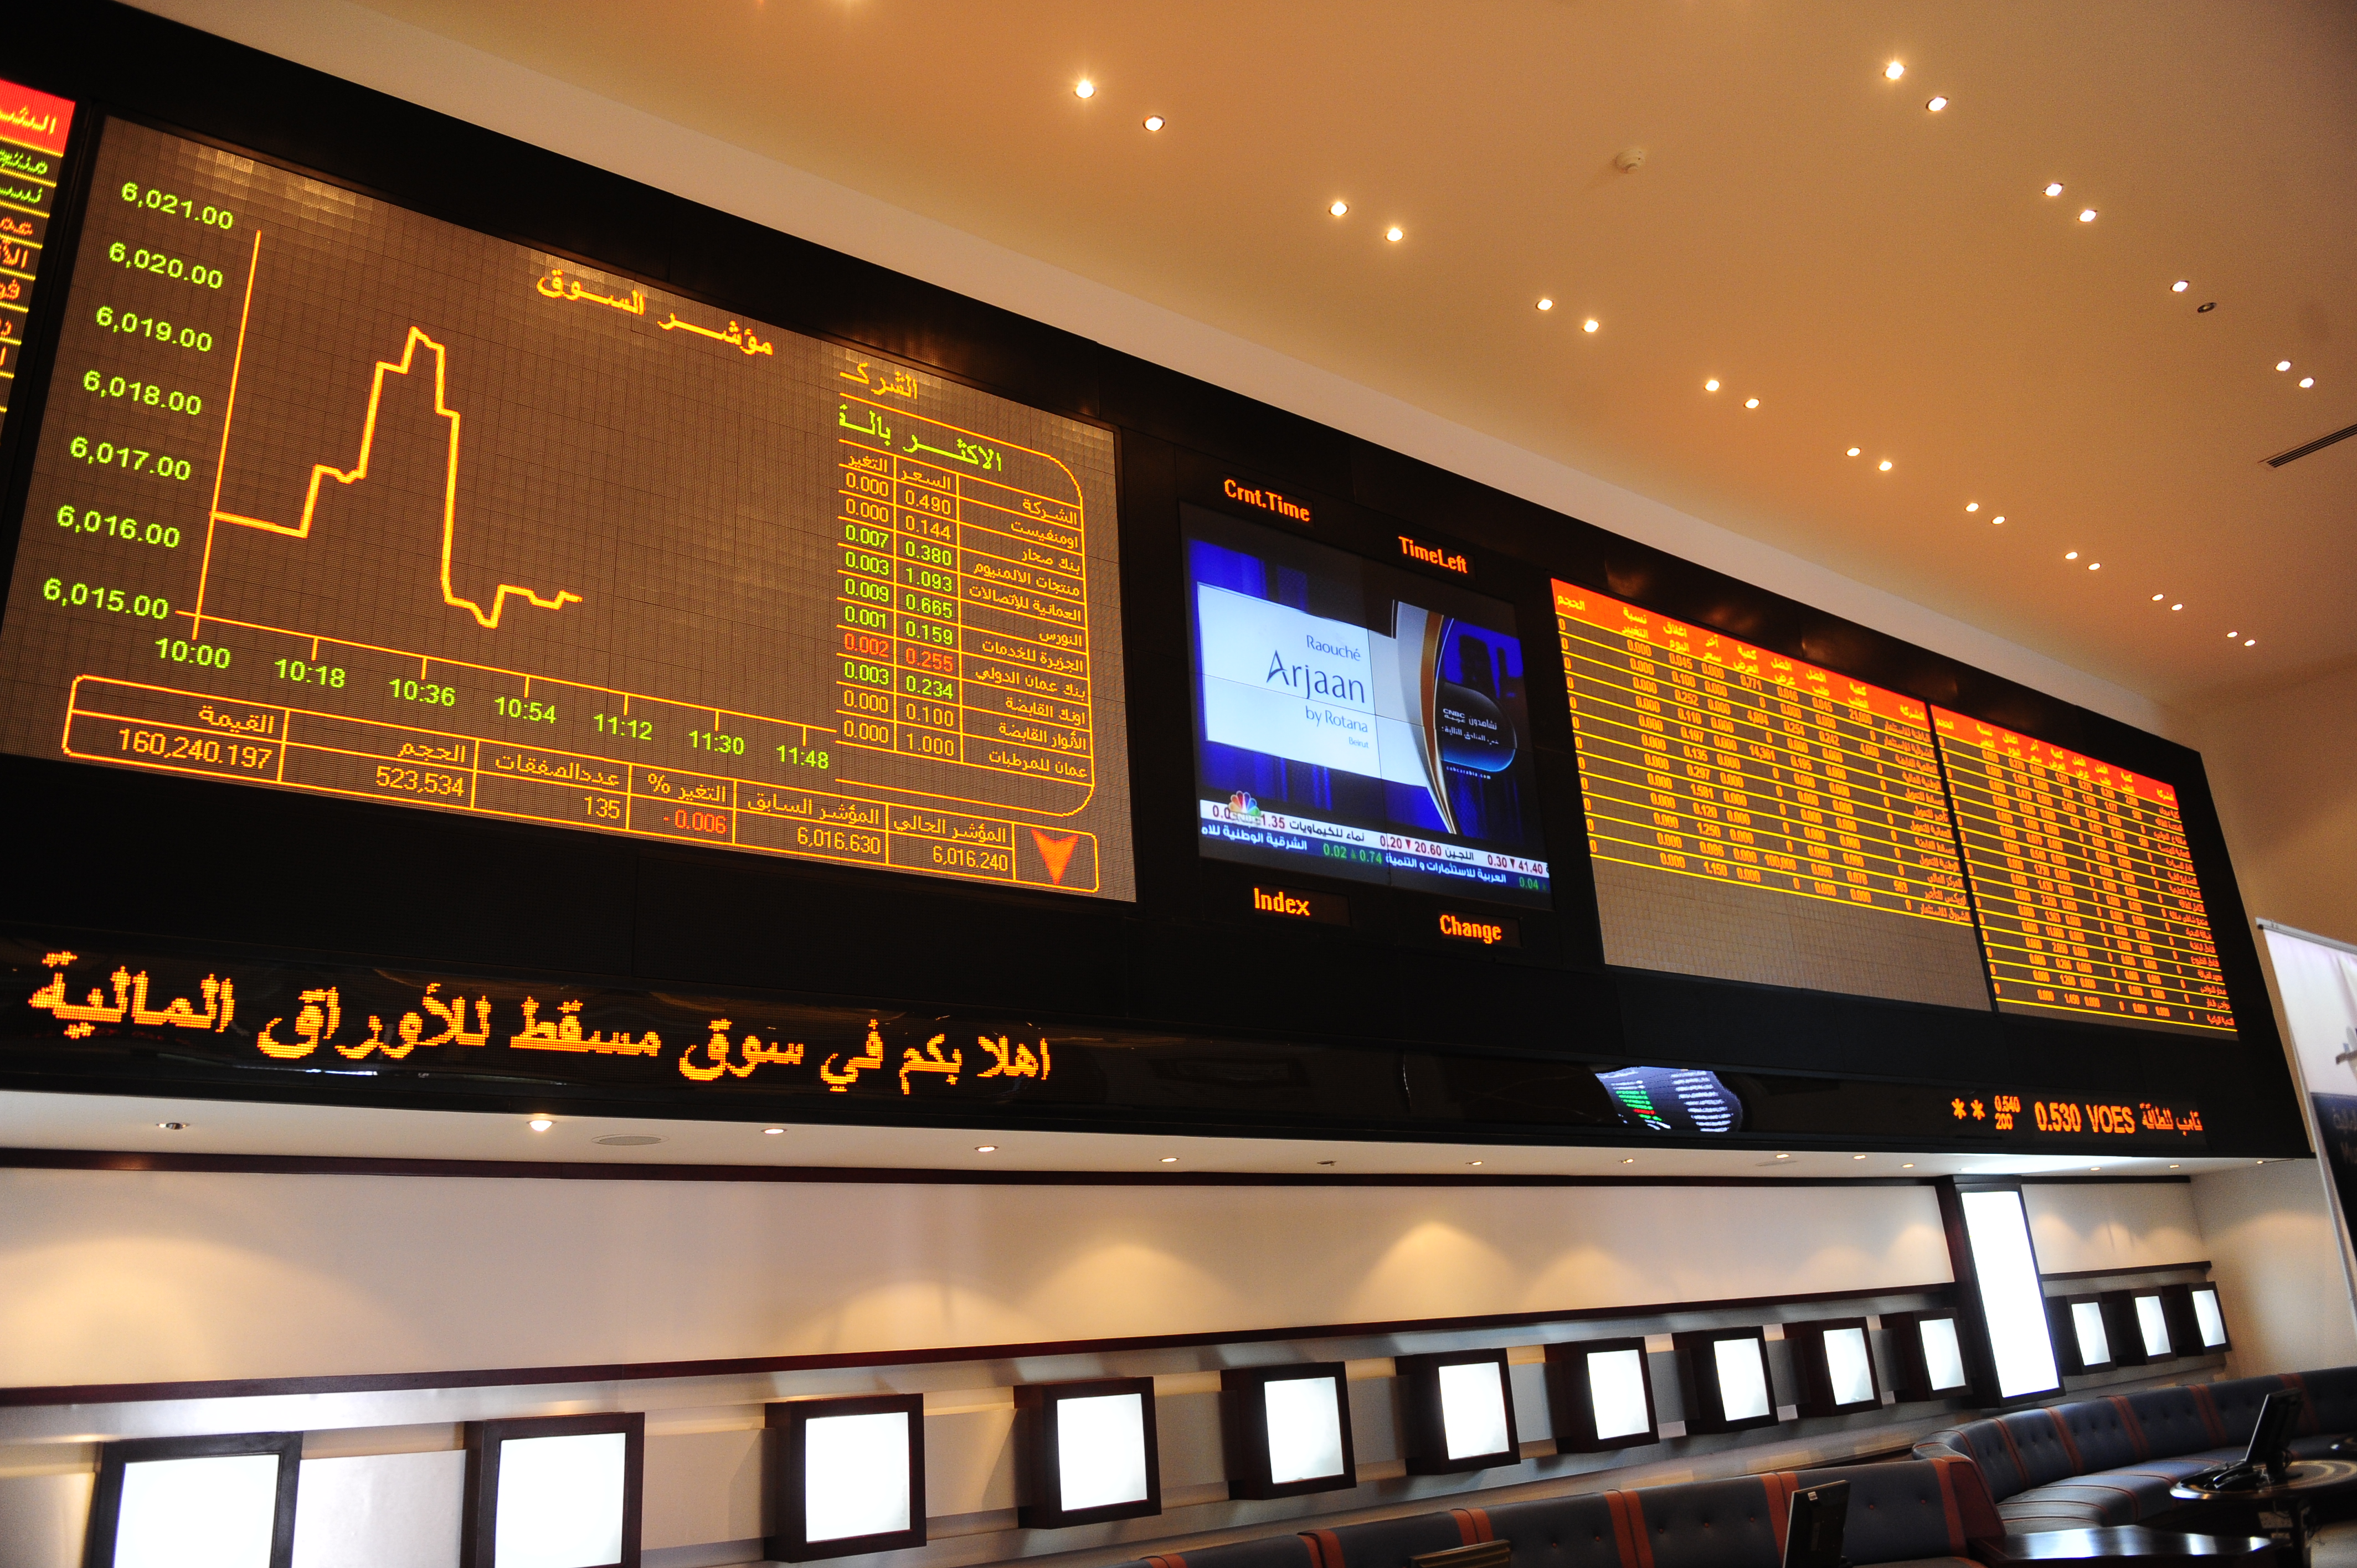 Oman’s share index gains on strong buying support